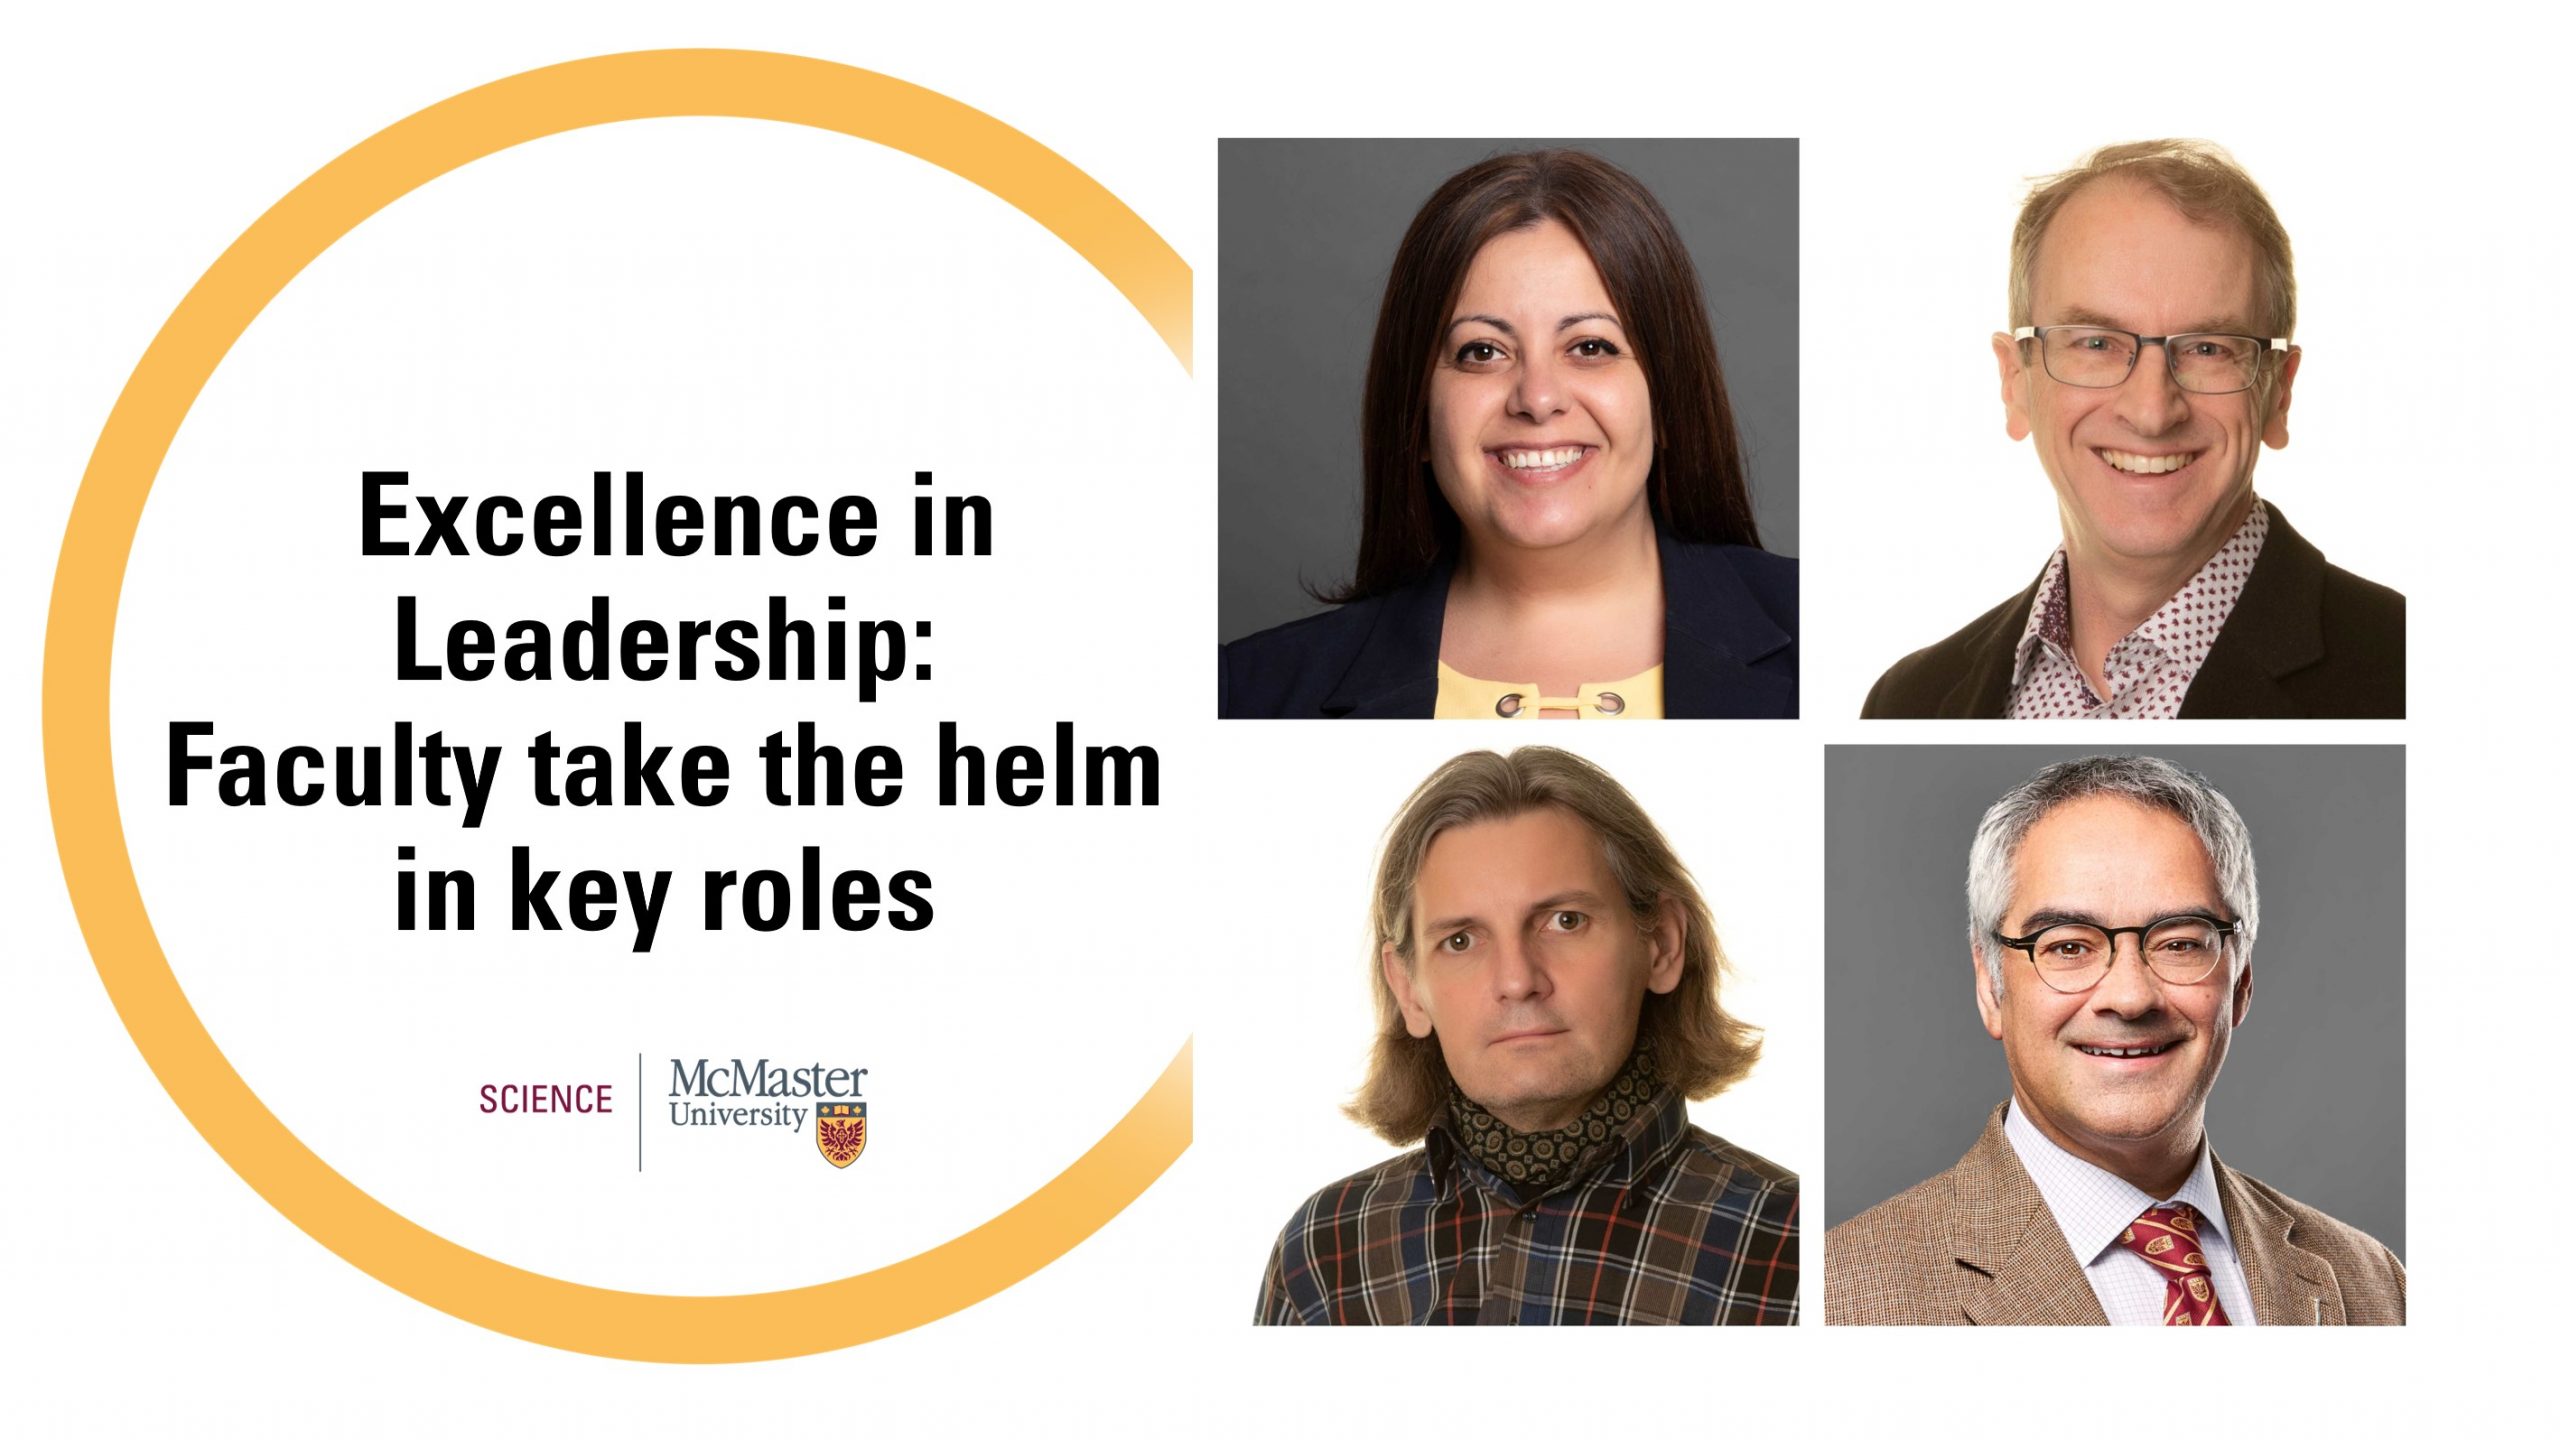 Excellence in leadership: four faculty assume leadership roles